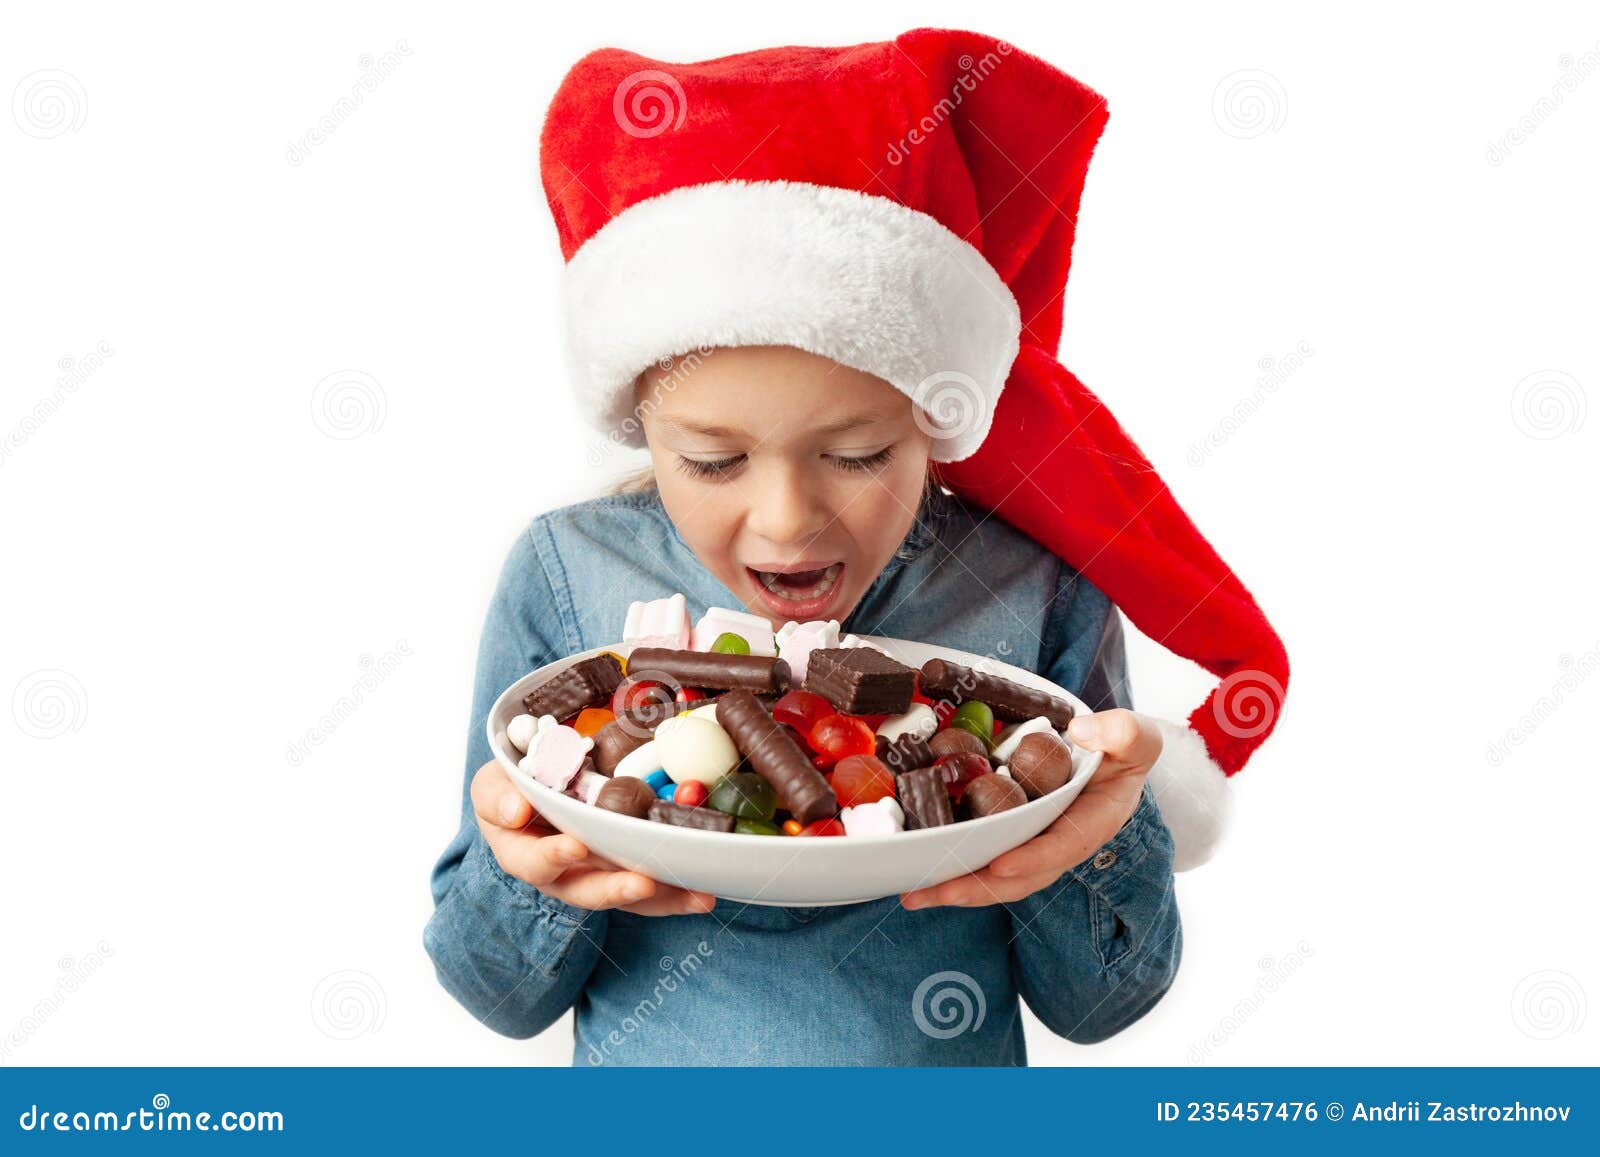 a child in a santa hat adores sweets. a plate full of assorted chocolates in the hands of a little girl